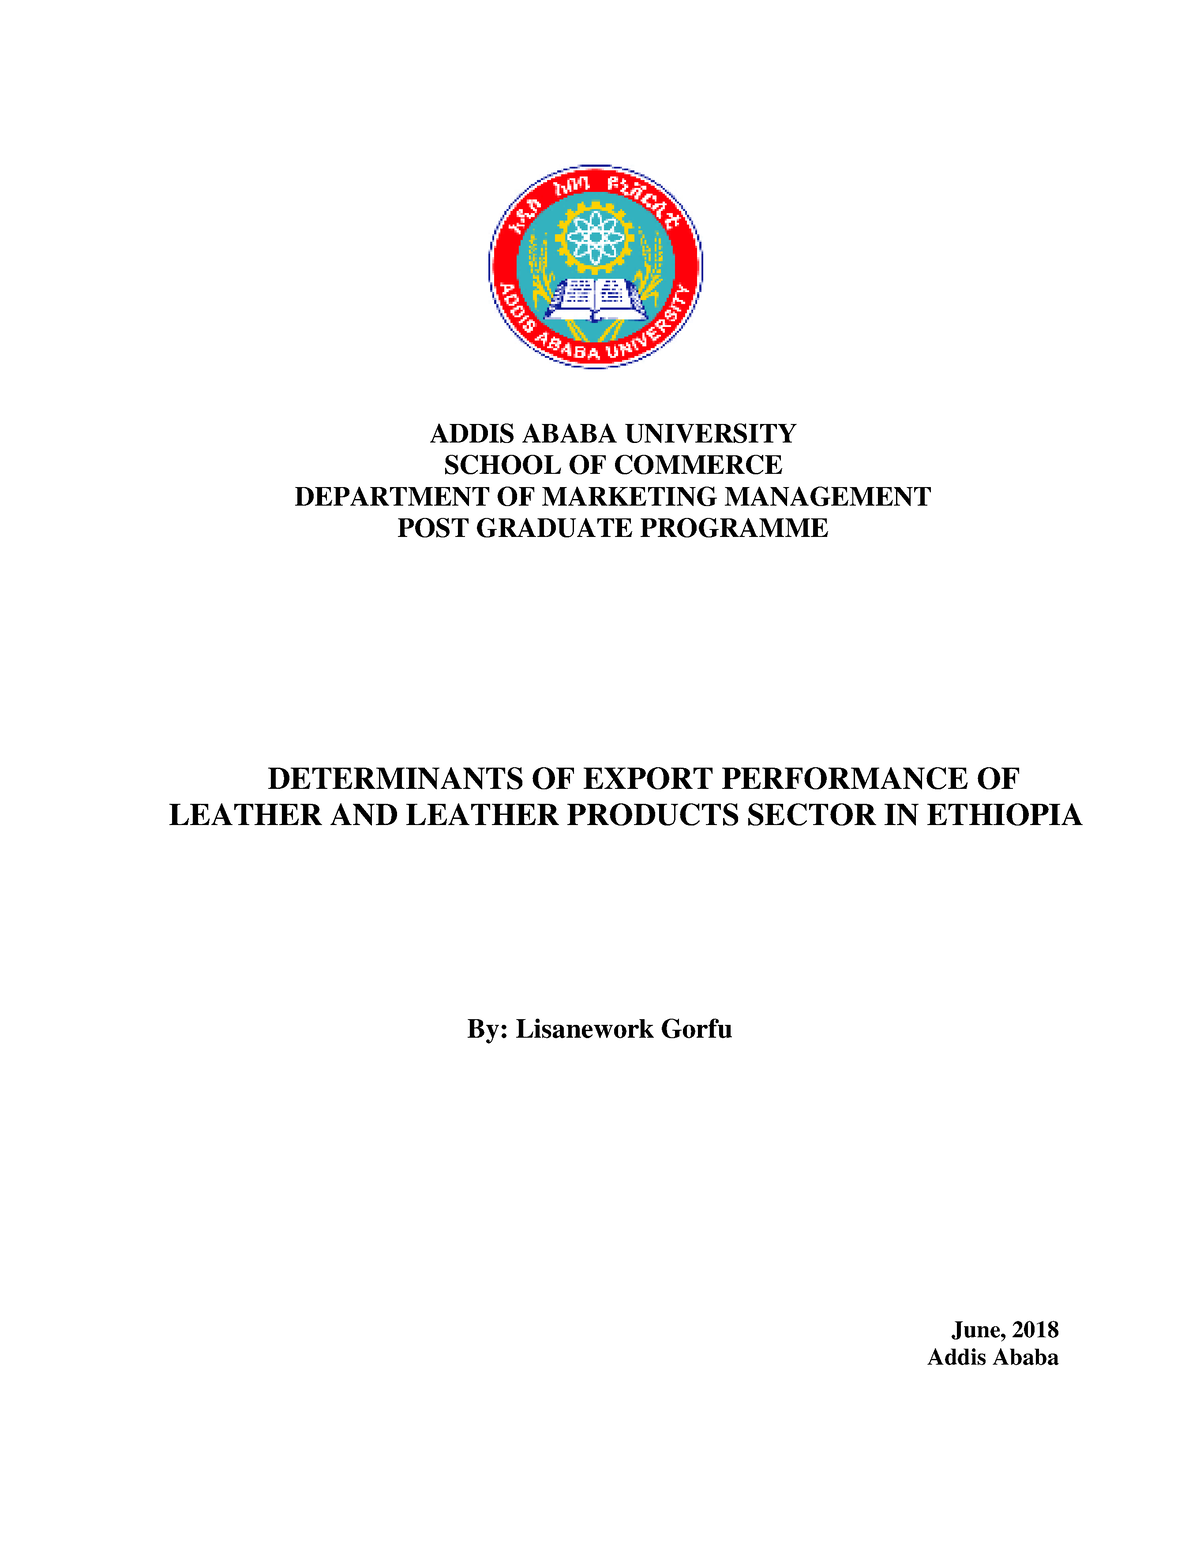 project management thesis addis ababa university